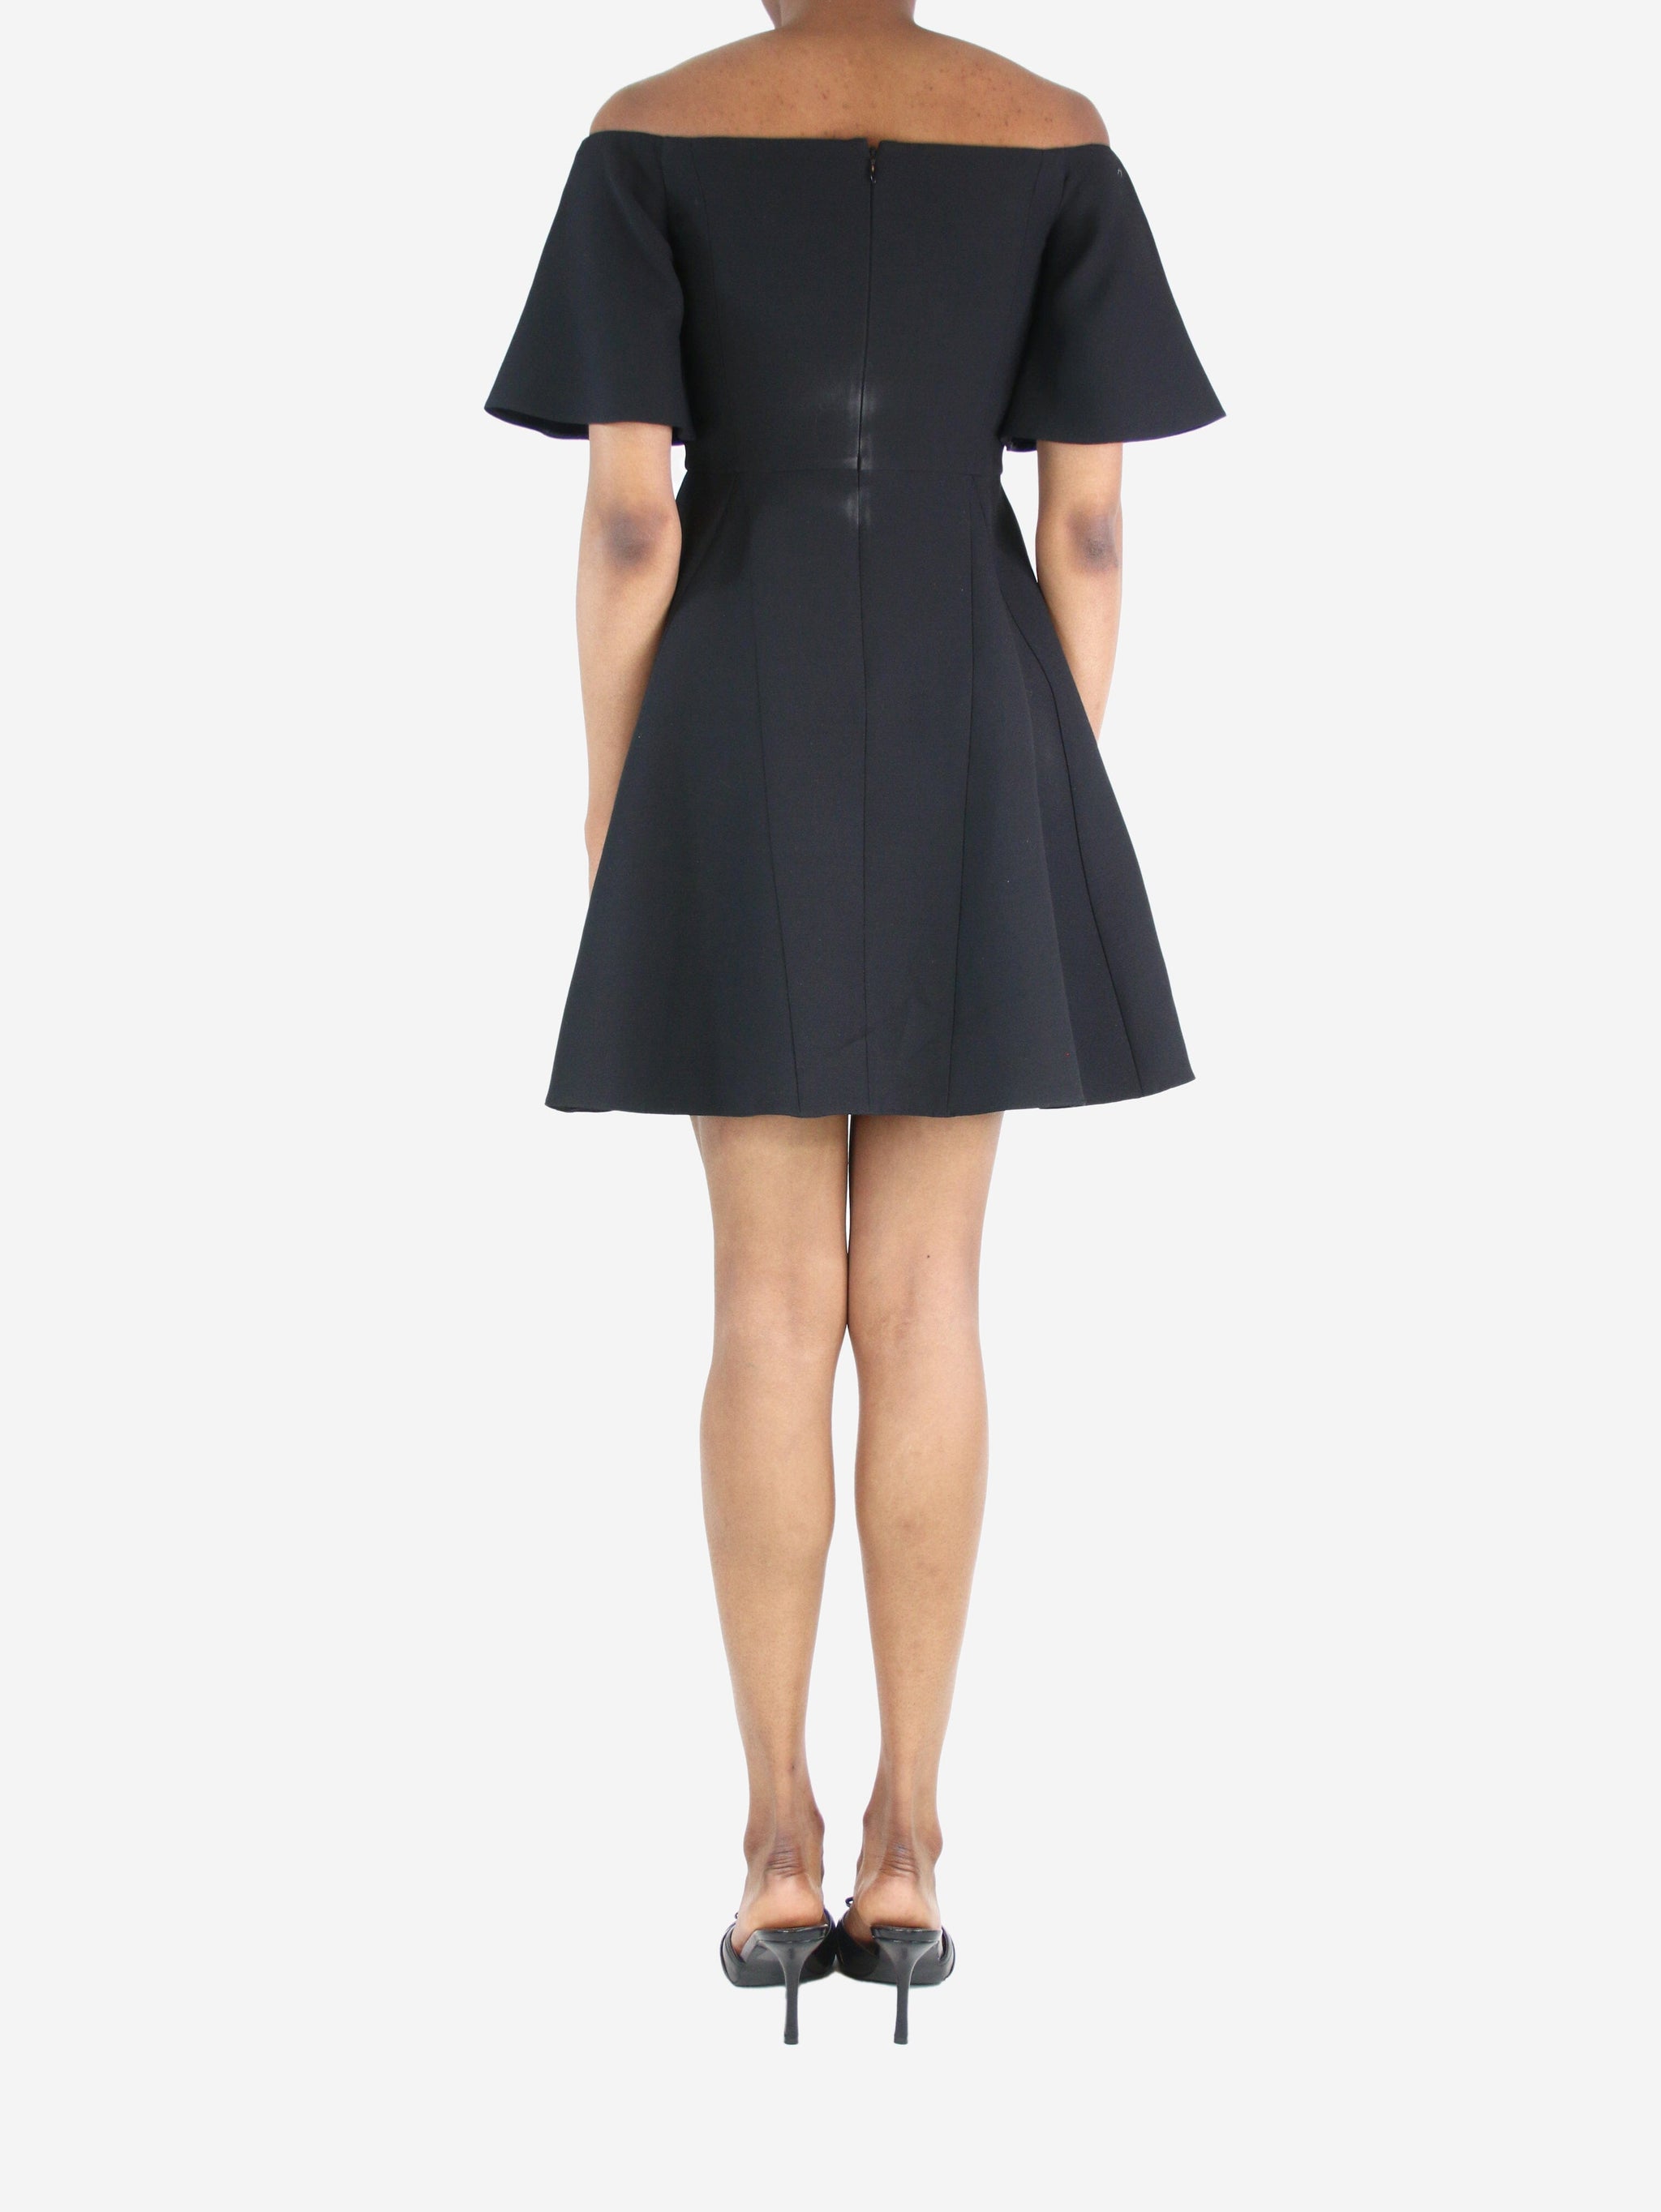 Valentino pre-owned black wide-neck A-line mini dress | Sign of the Times